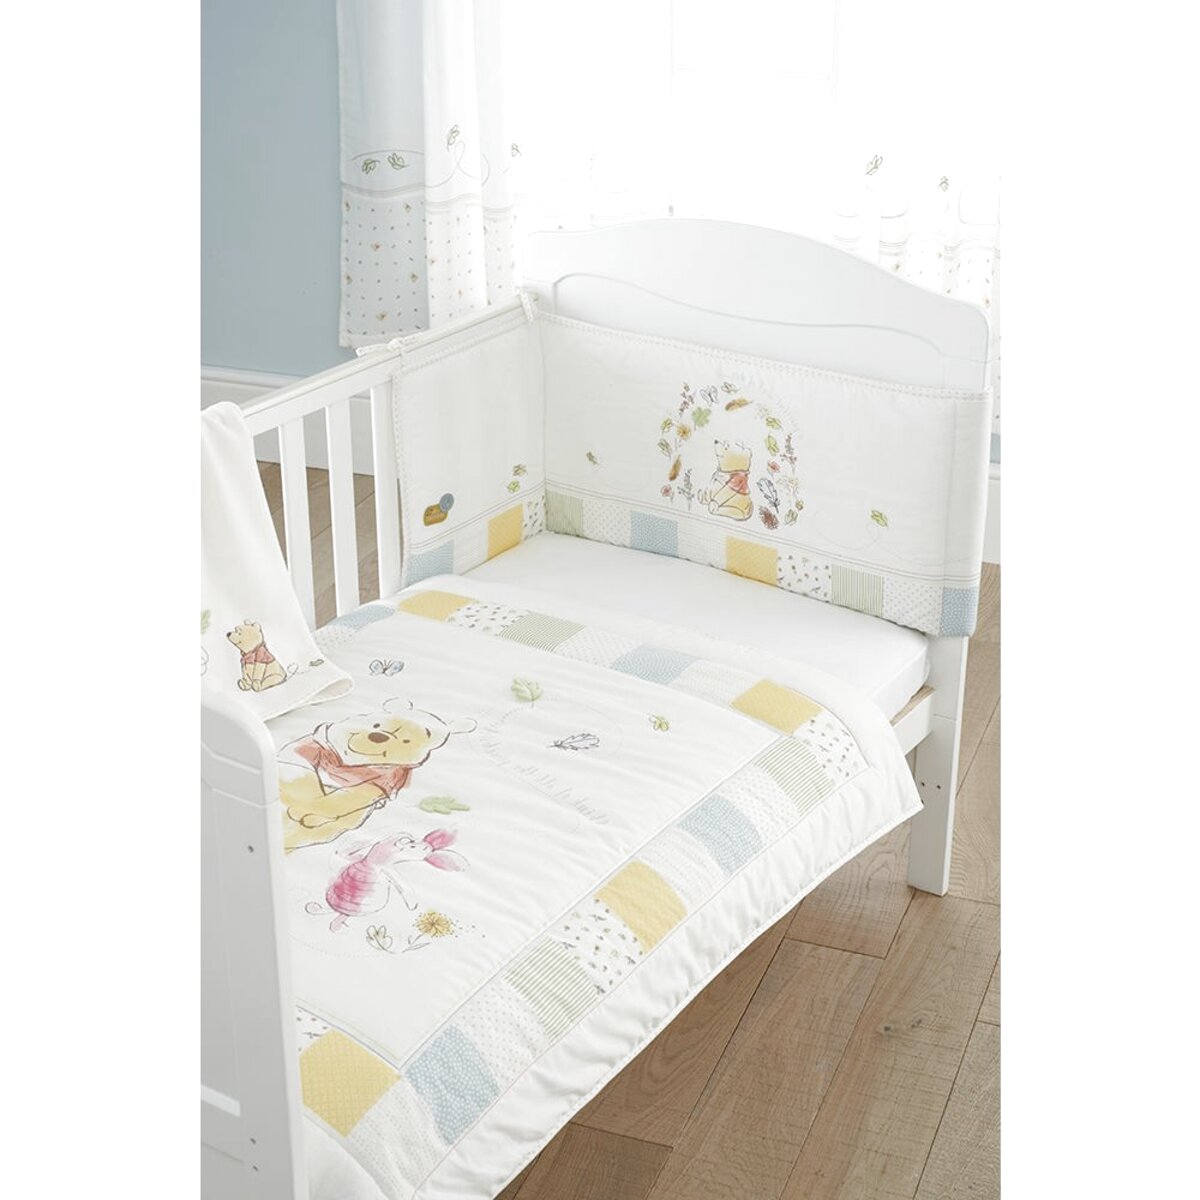 Winnie Pooh Cot Bedding For Sale In Uk View 45 Bargains